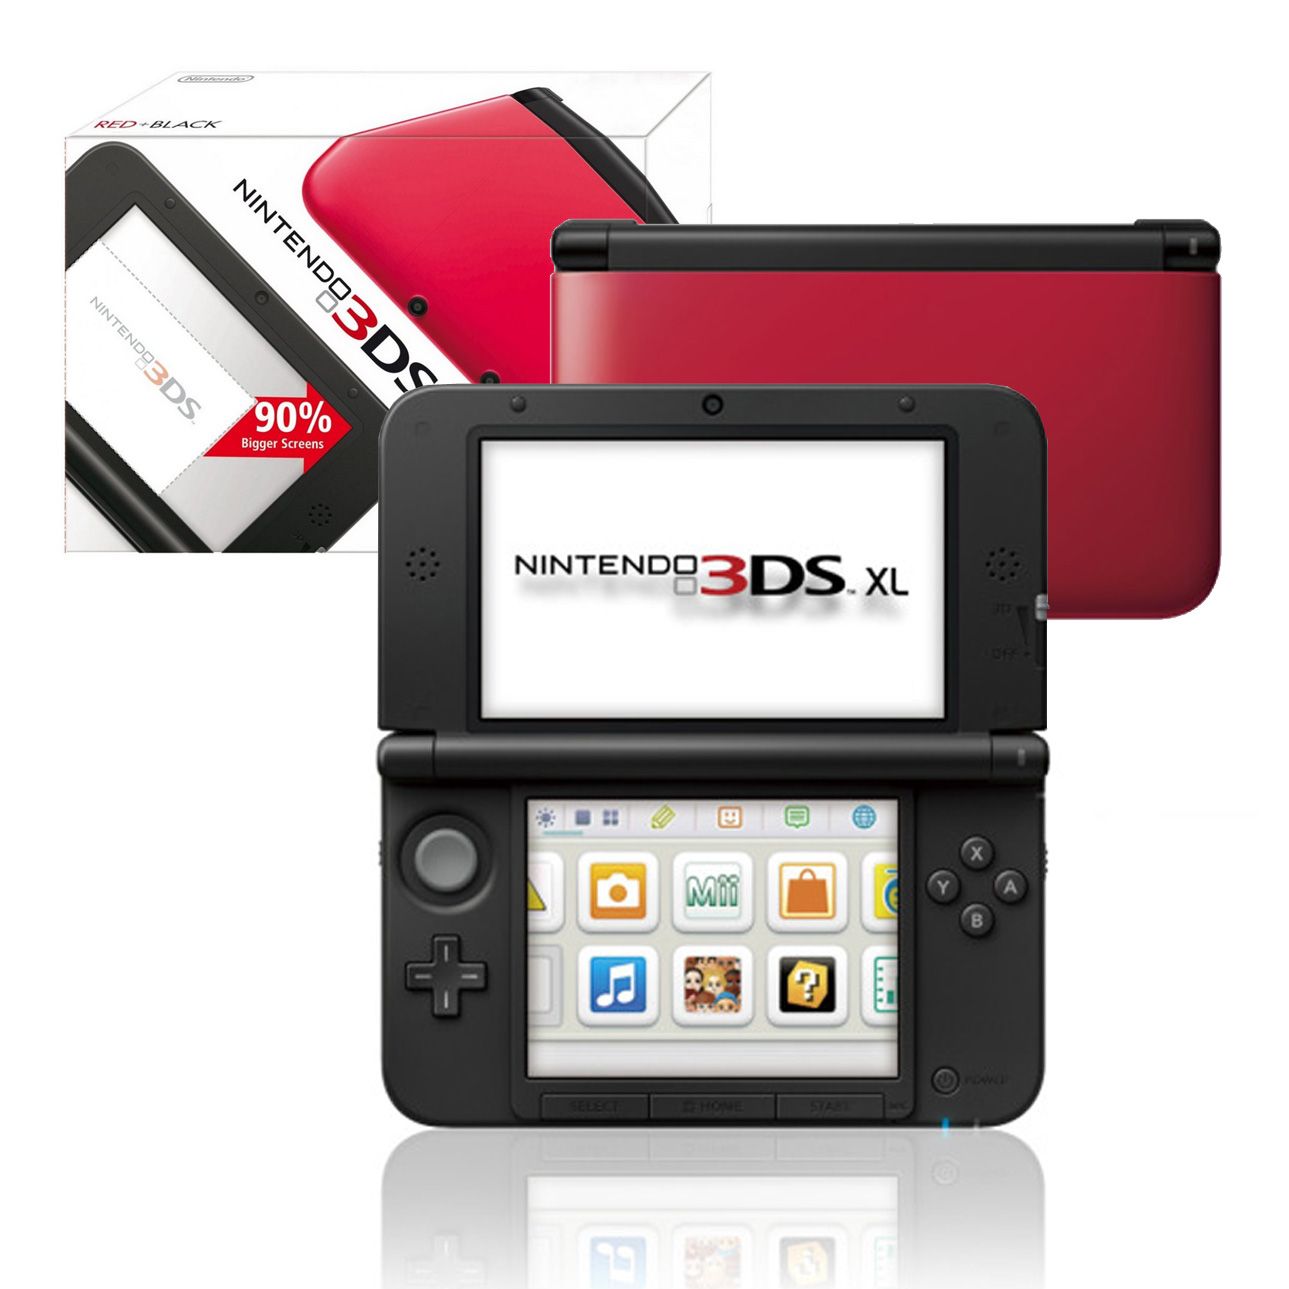 Nintendo 3DS XL Red and Black Handheld Consle